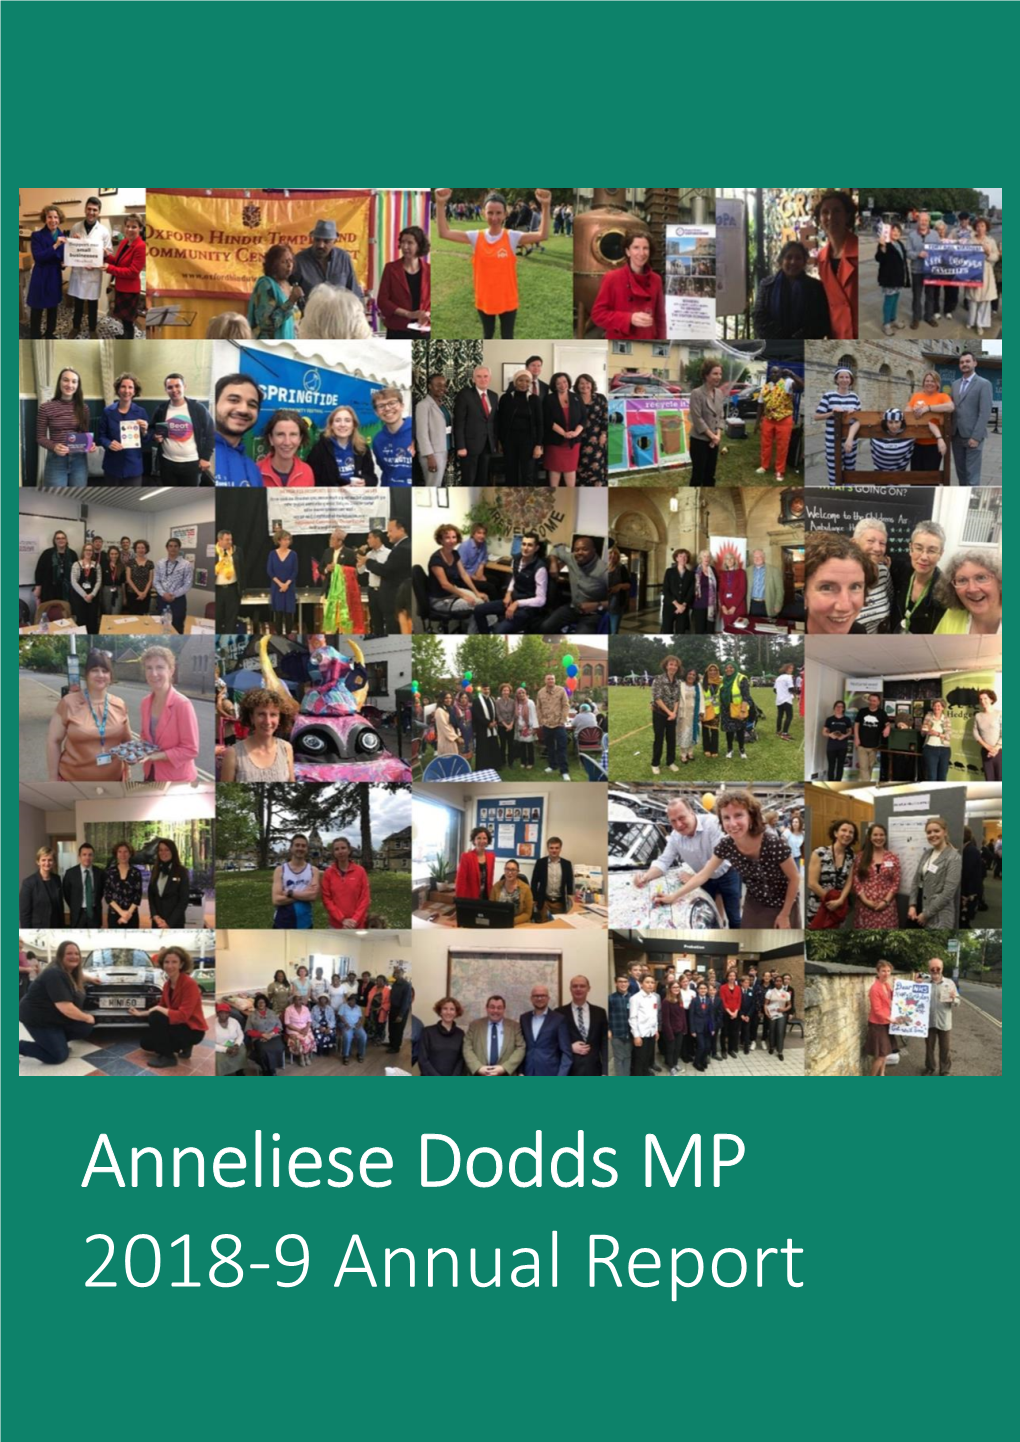 Anneliese Dodds MP 2018-9 Annual Report